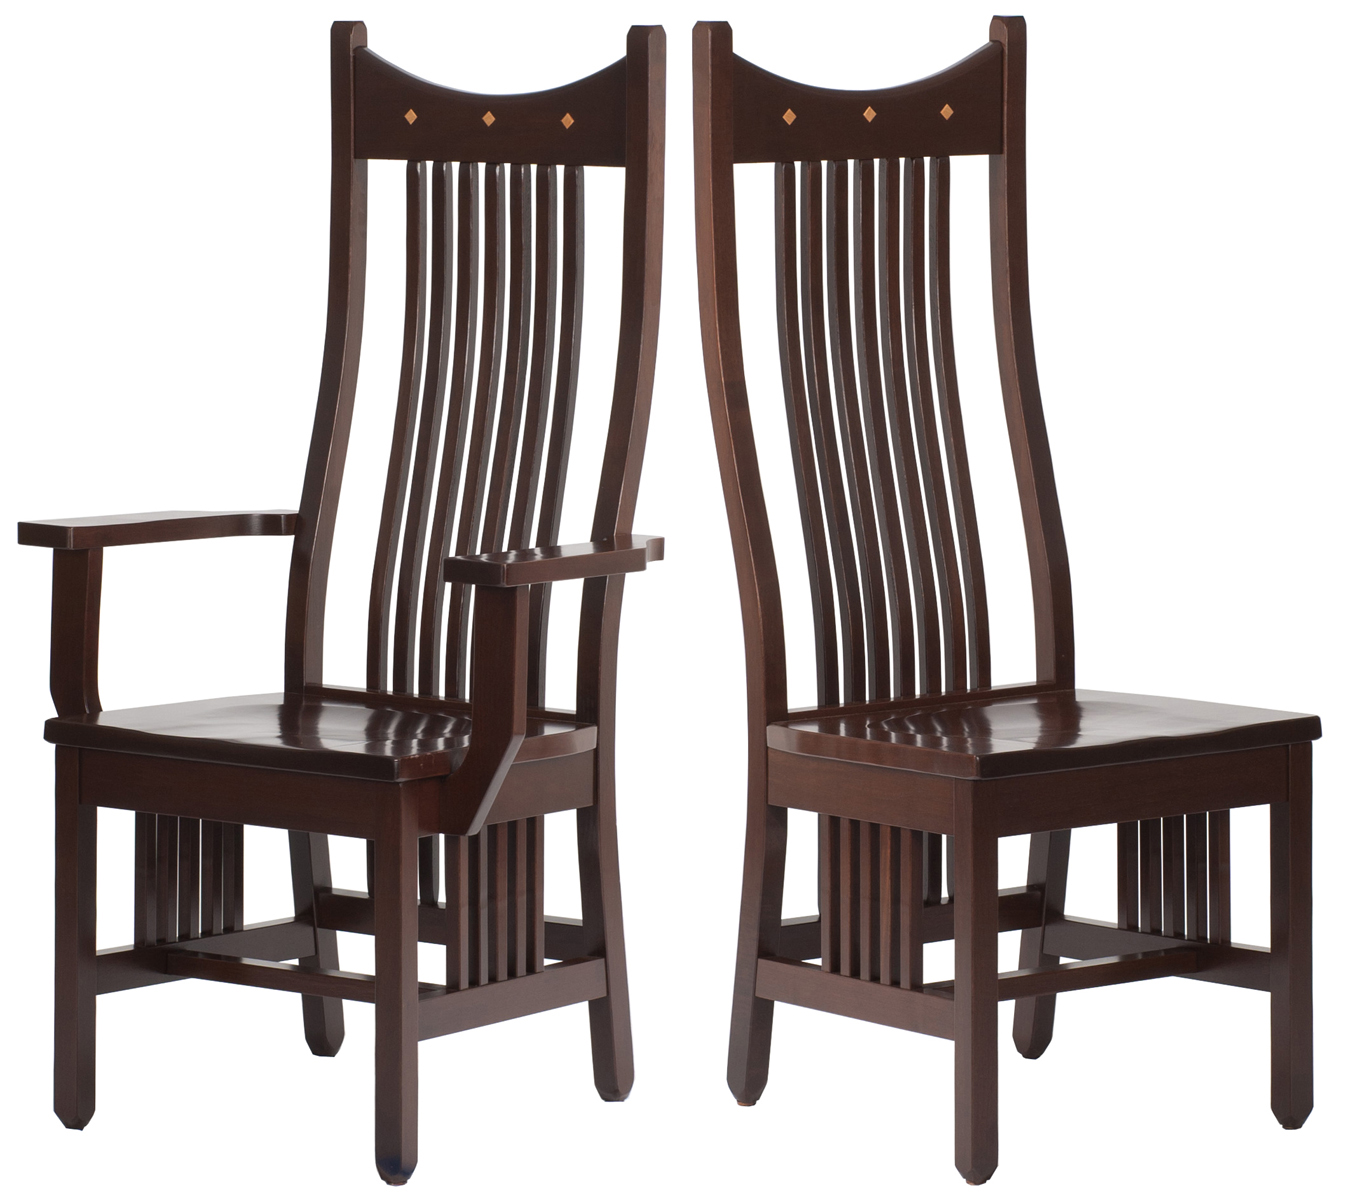 Western Dining Chair Dining Room Chair In The Western Style